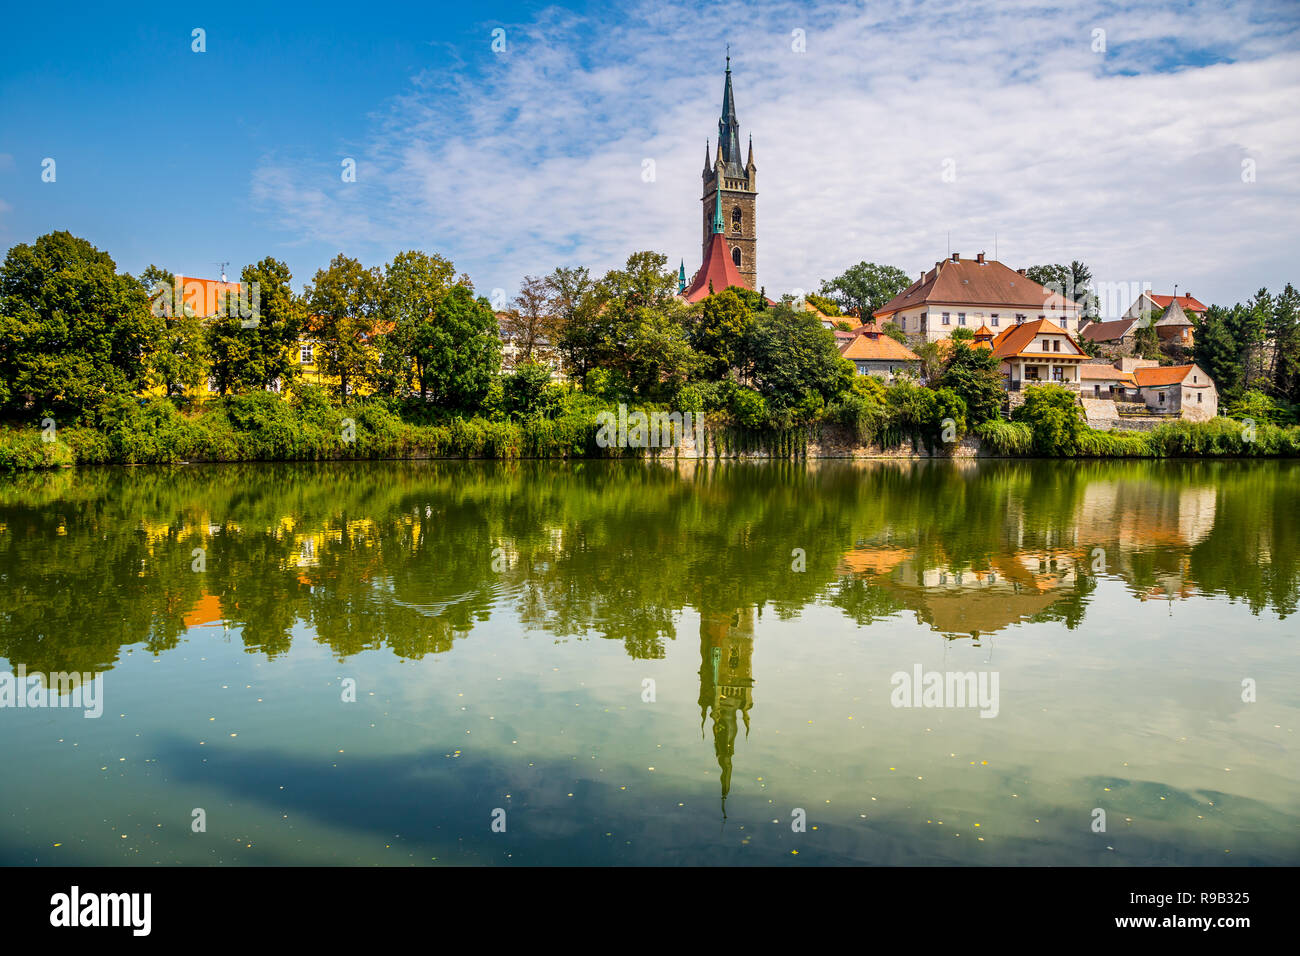 A view across the surface of the marker on the historical city of Caslav in central Bohemia Stock Photo